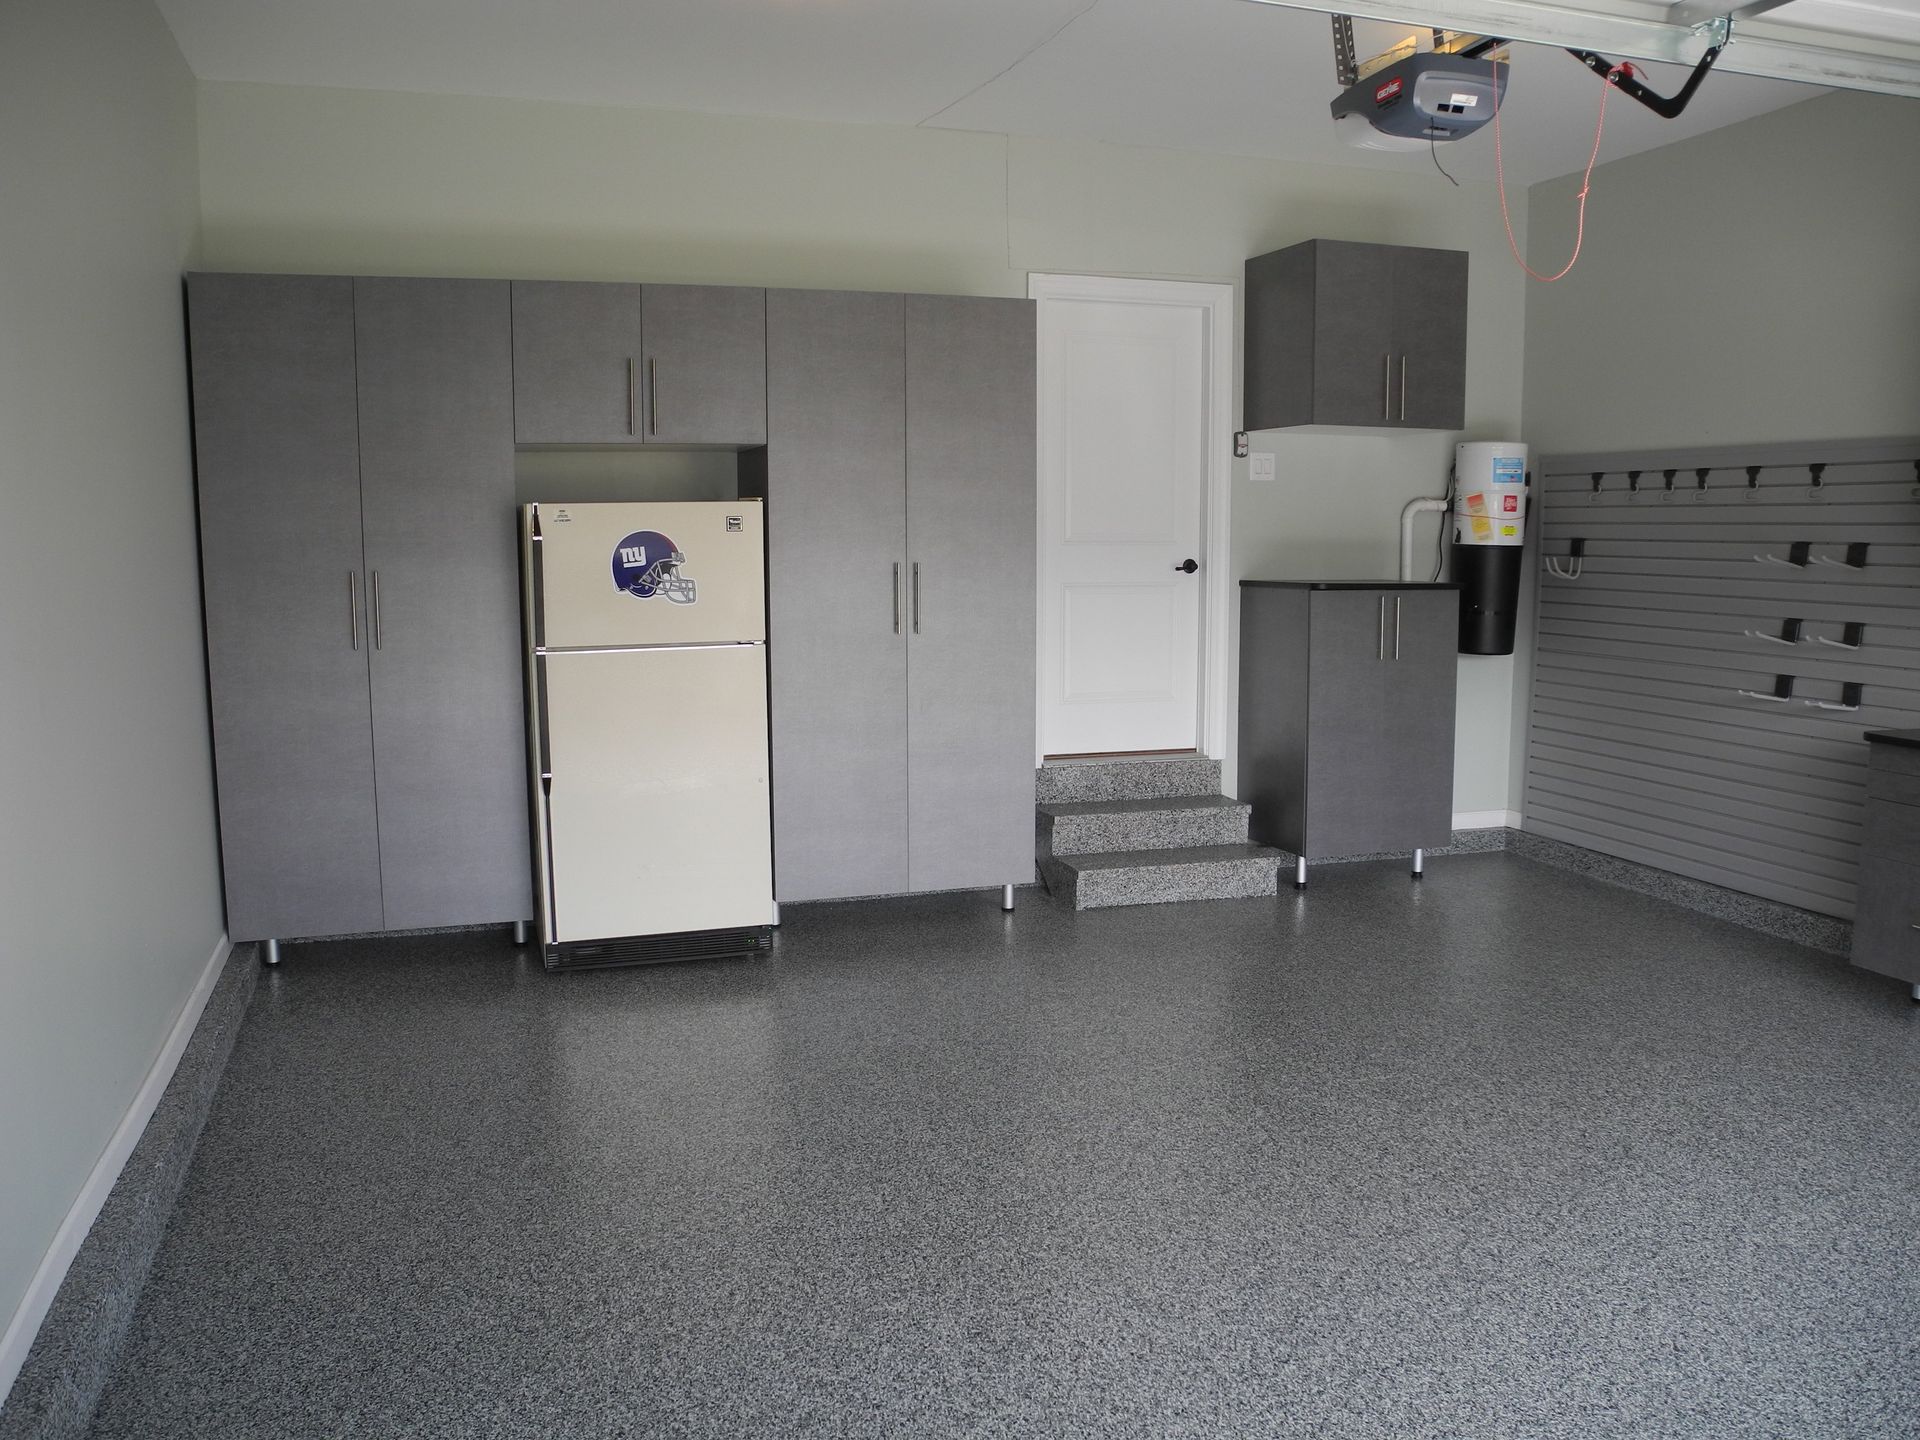 Pewter Garage Cabinets and Grey Slot Wall